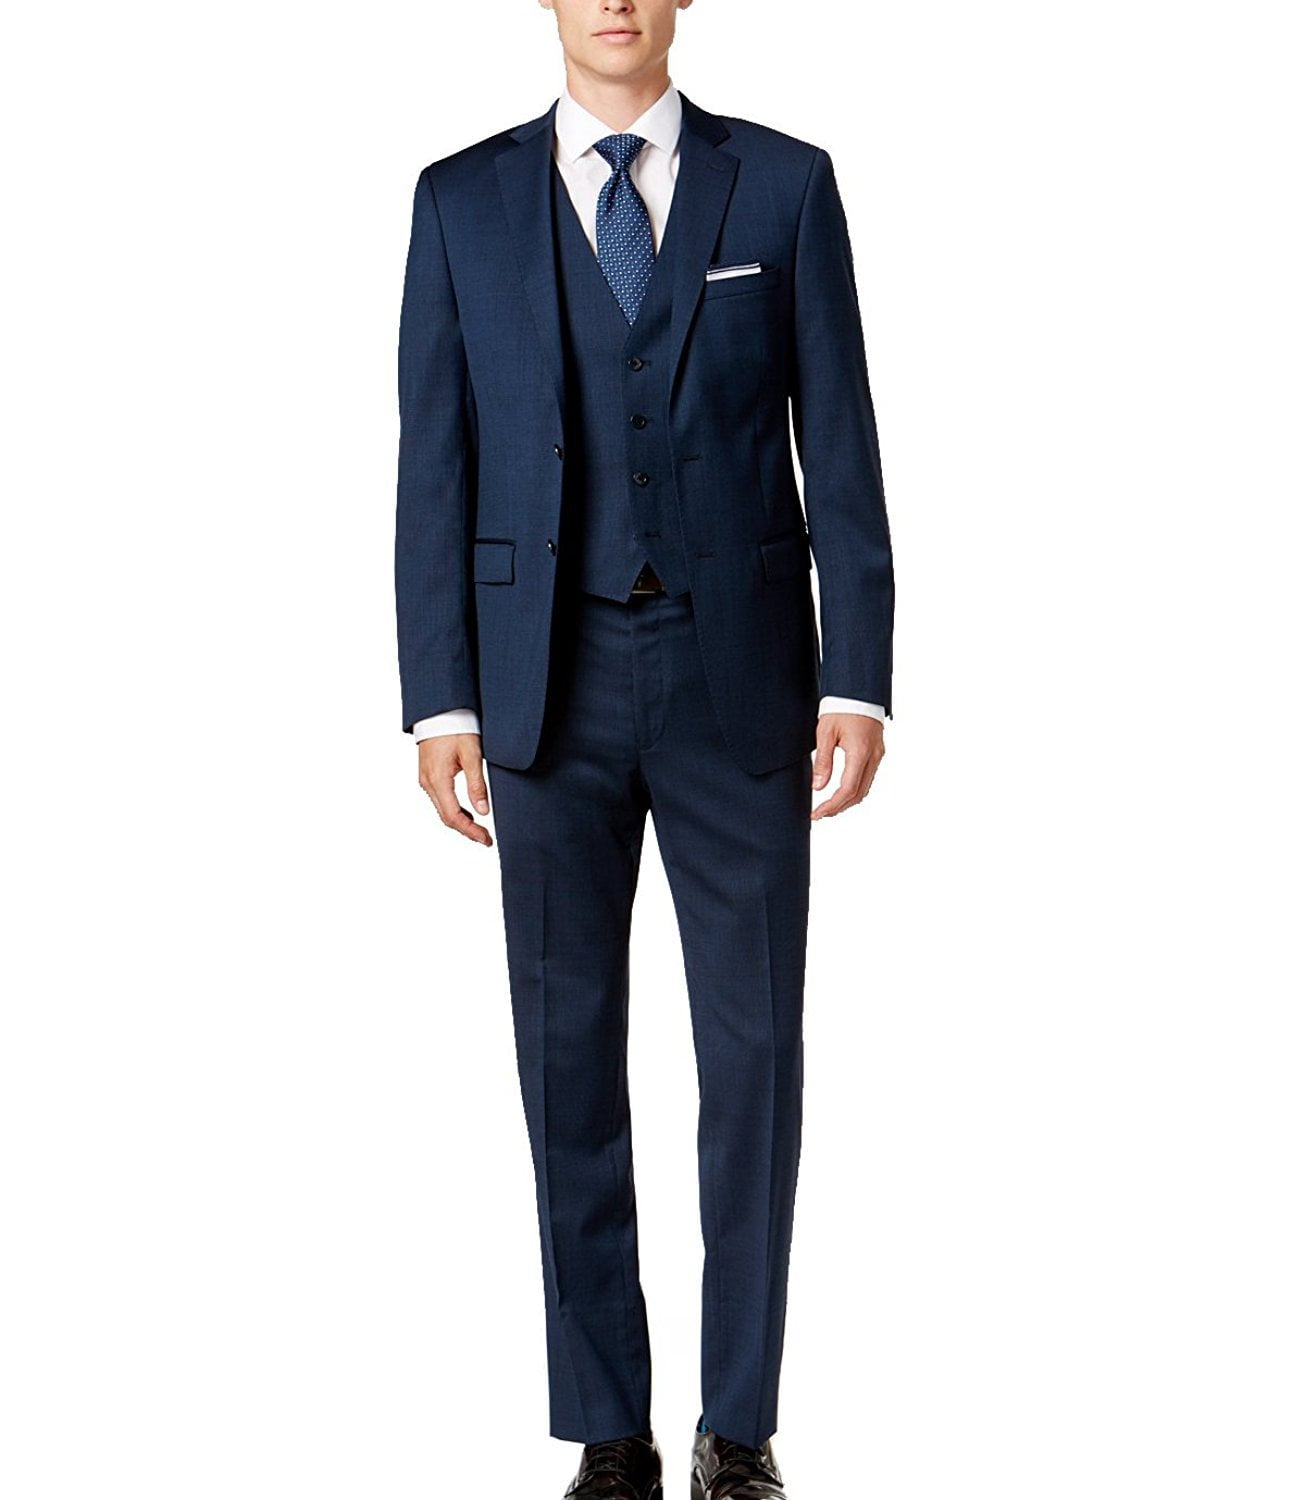 Caravelli Men's 60560 3-Piece Single Breasted Slim Fit Vested Suit ...